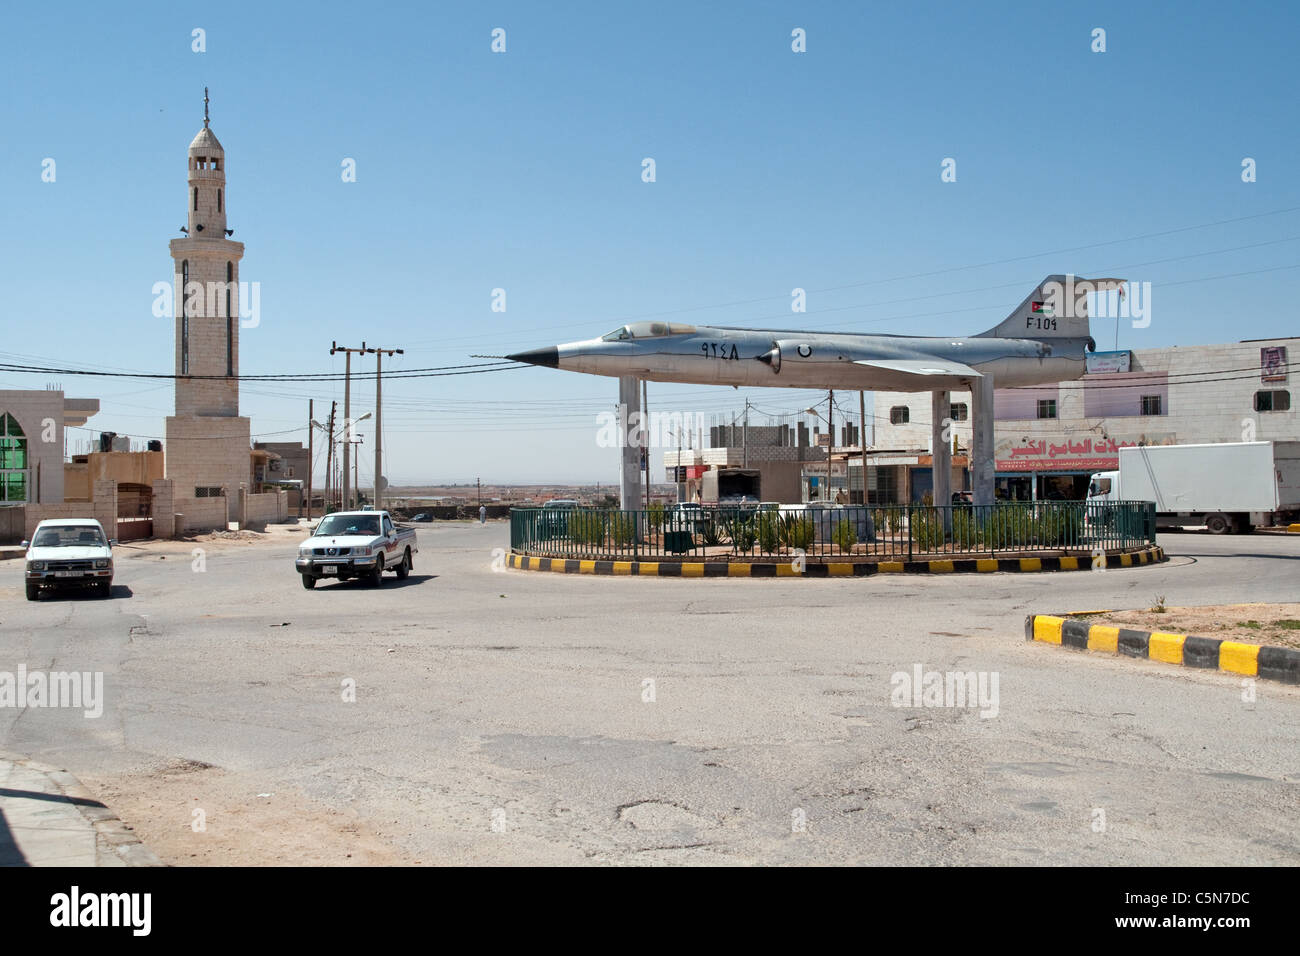 An F-104 starfighter, tops a roundabout in a village in the al-Mafreq region of northern Jordan, near its border with Syria. Stock Photo